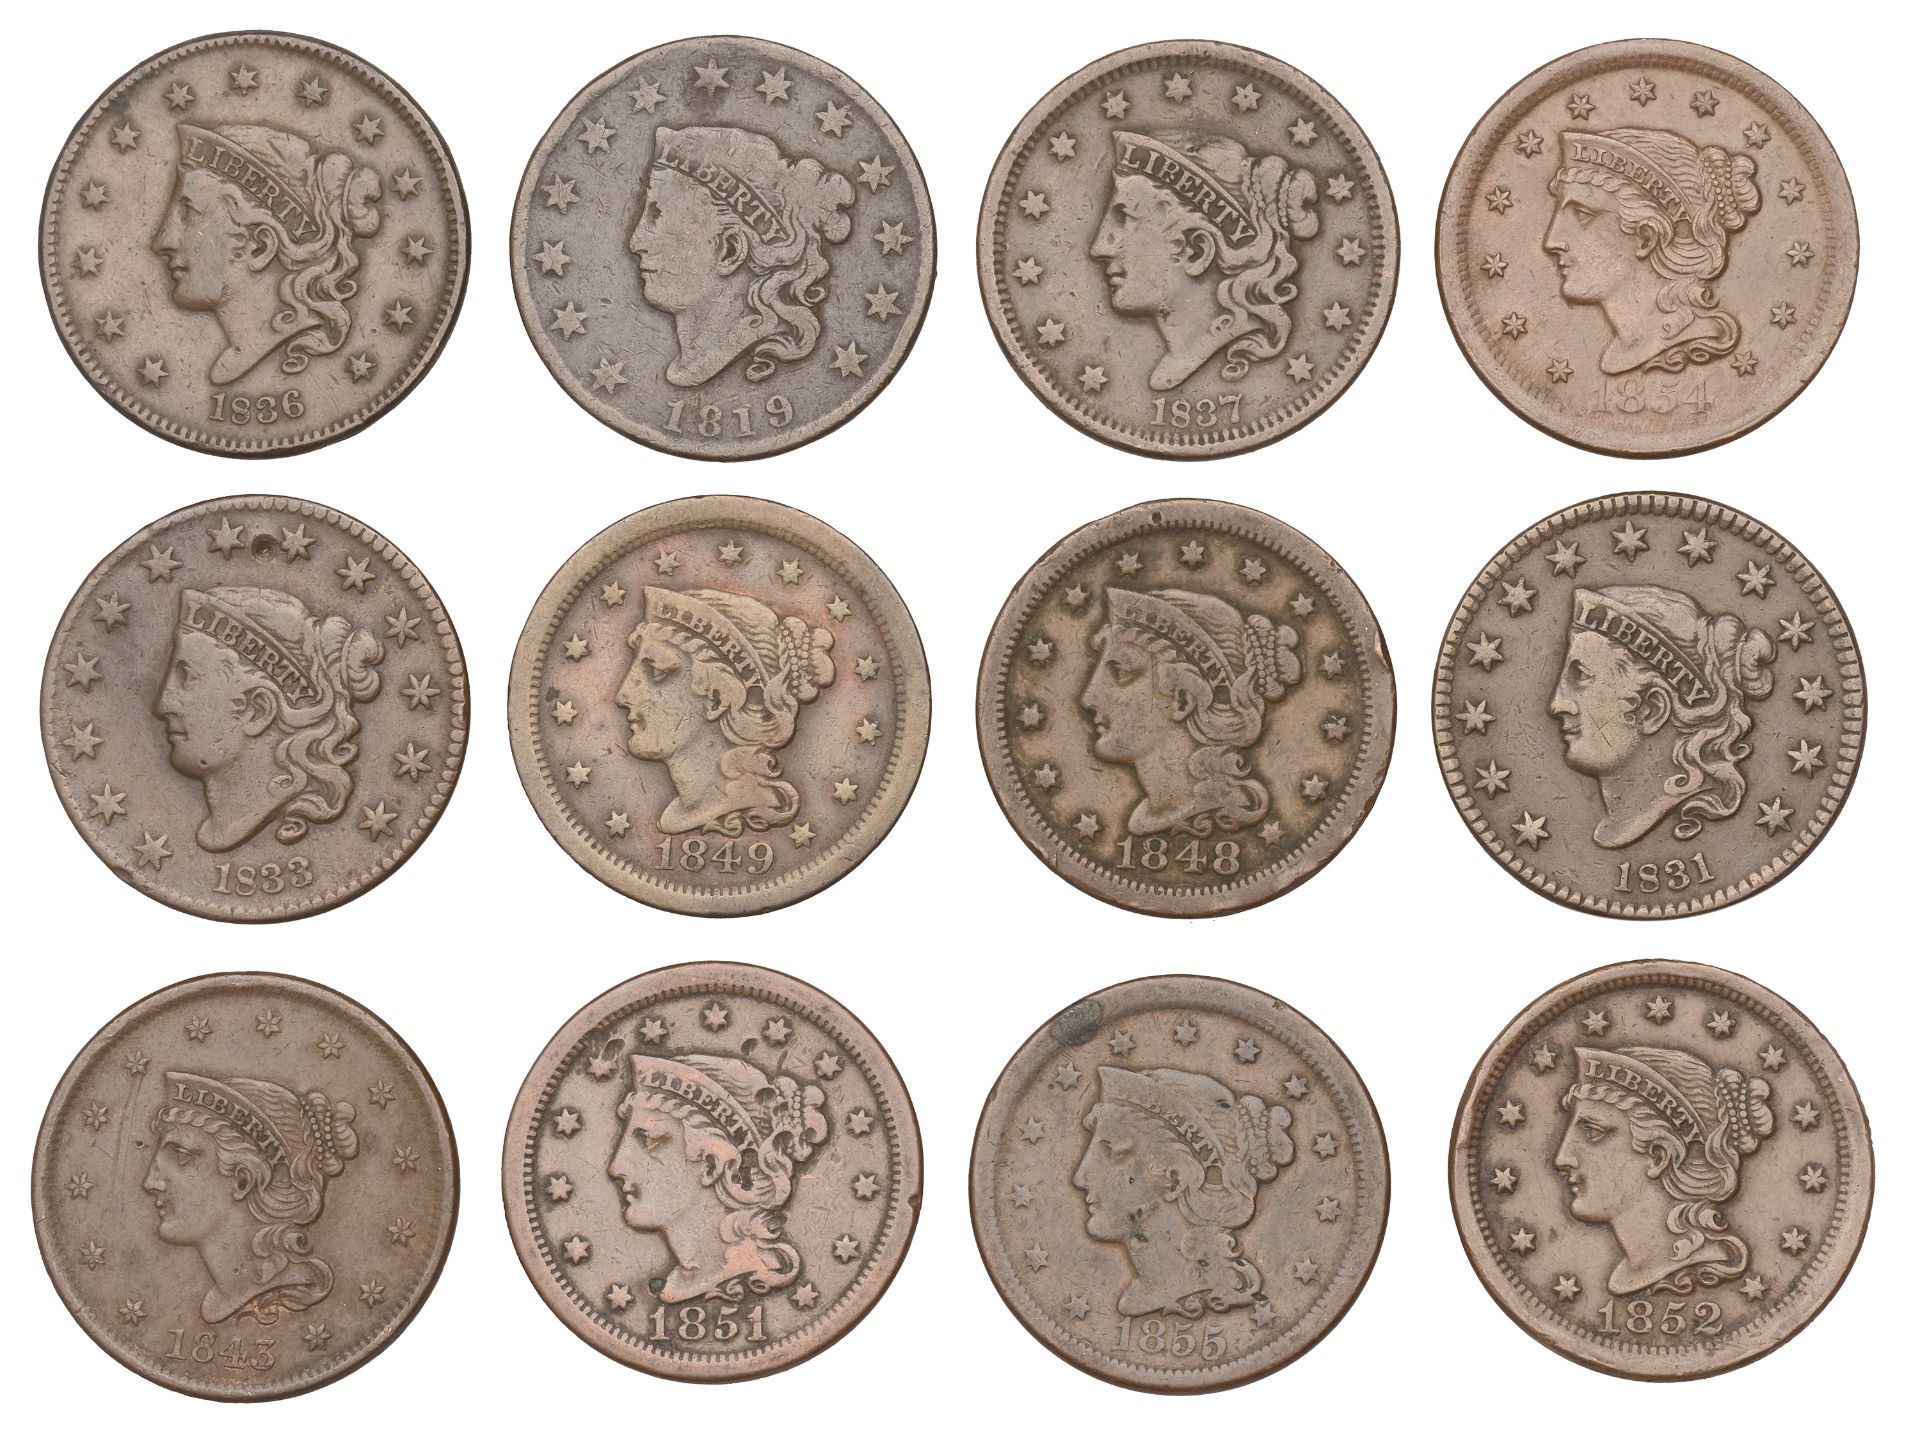 United States of America, Large Cents (12), 1819, 1831, 1833, 1836, 1837, 1843, 1848, 1849,...